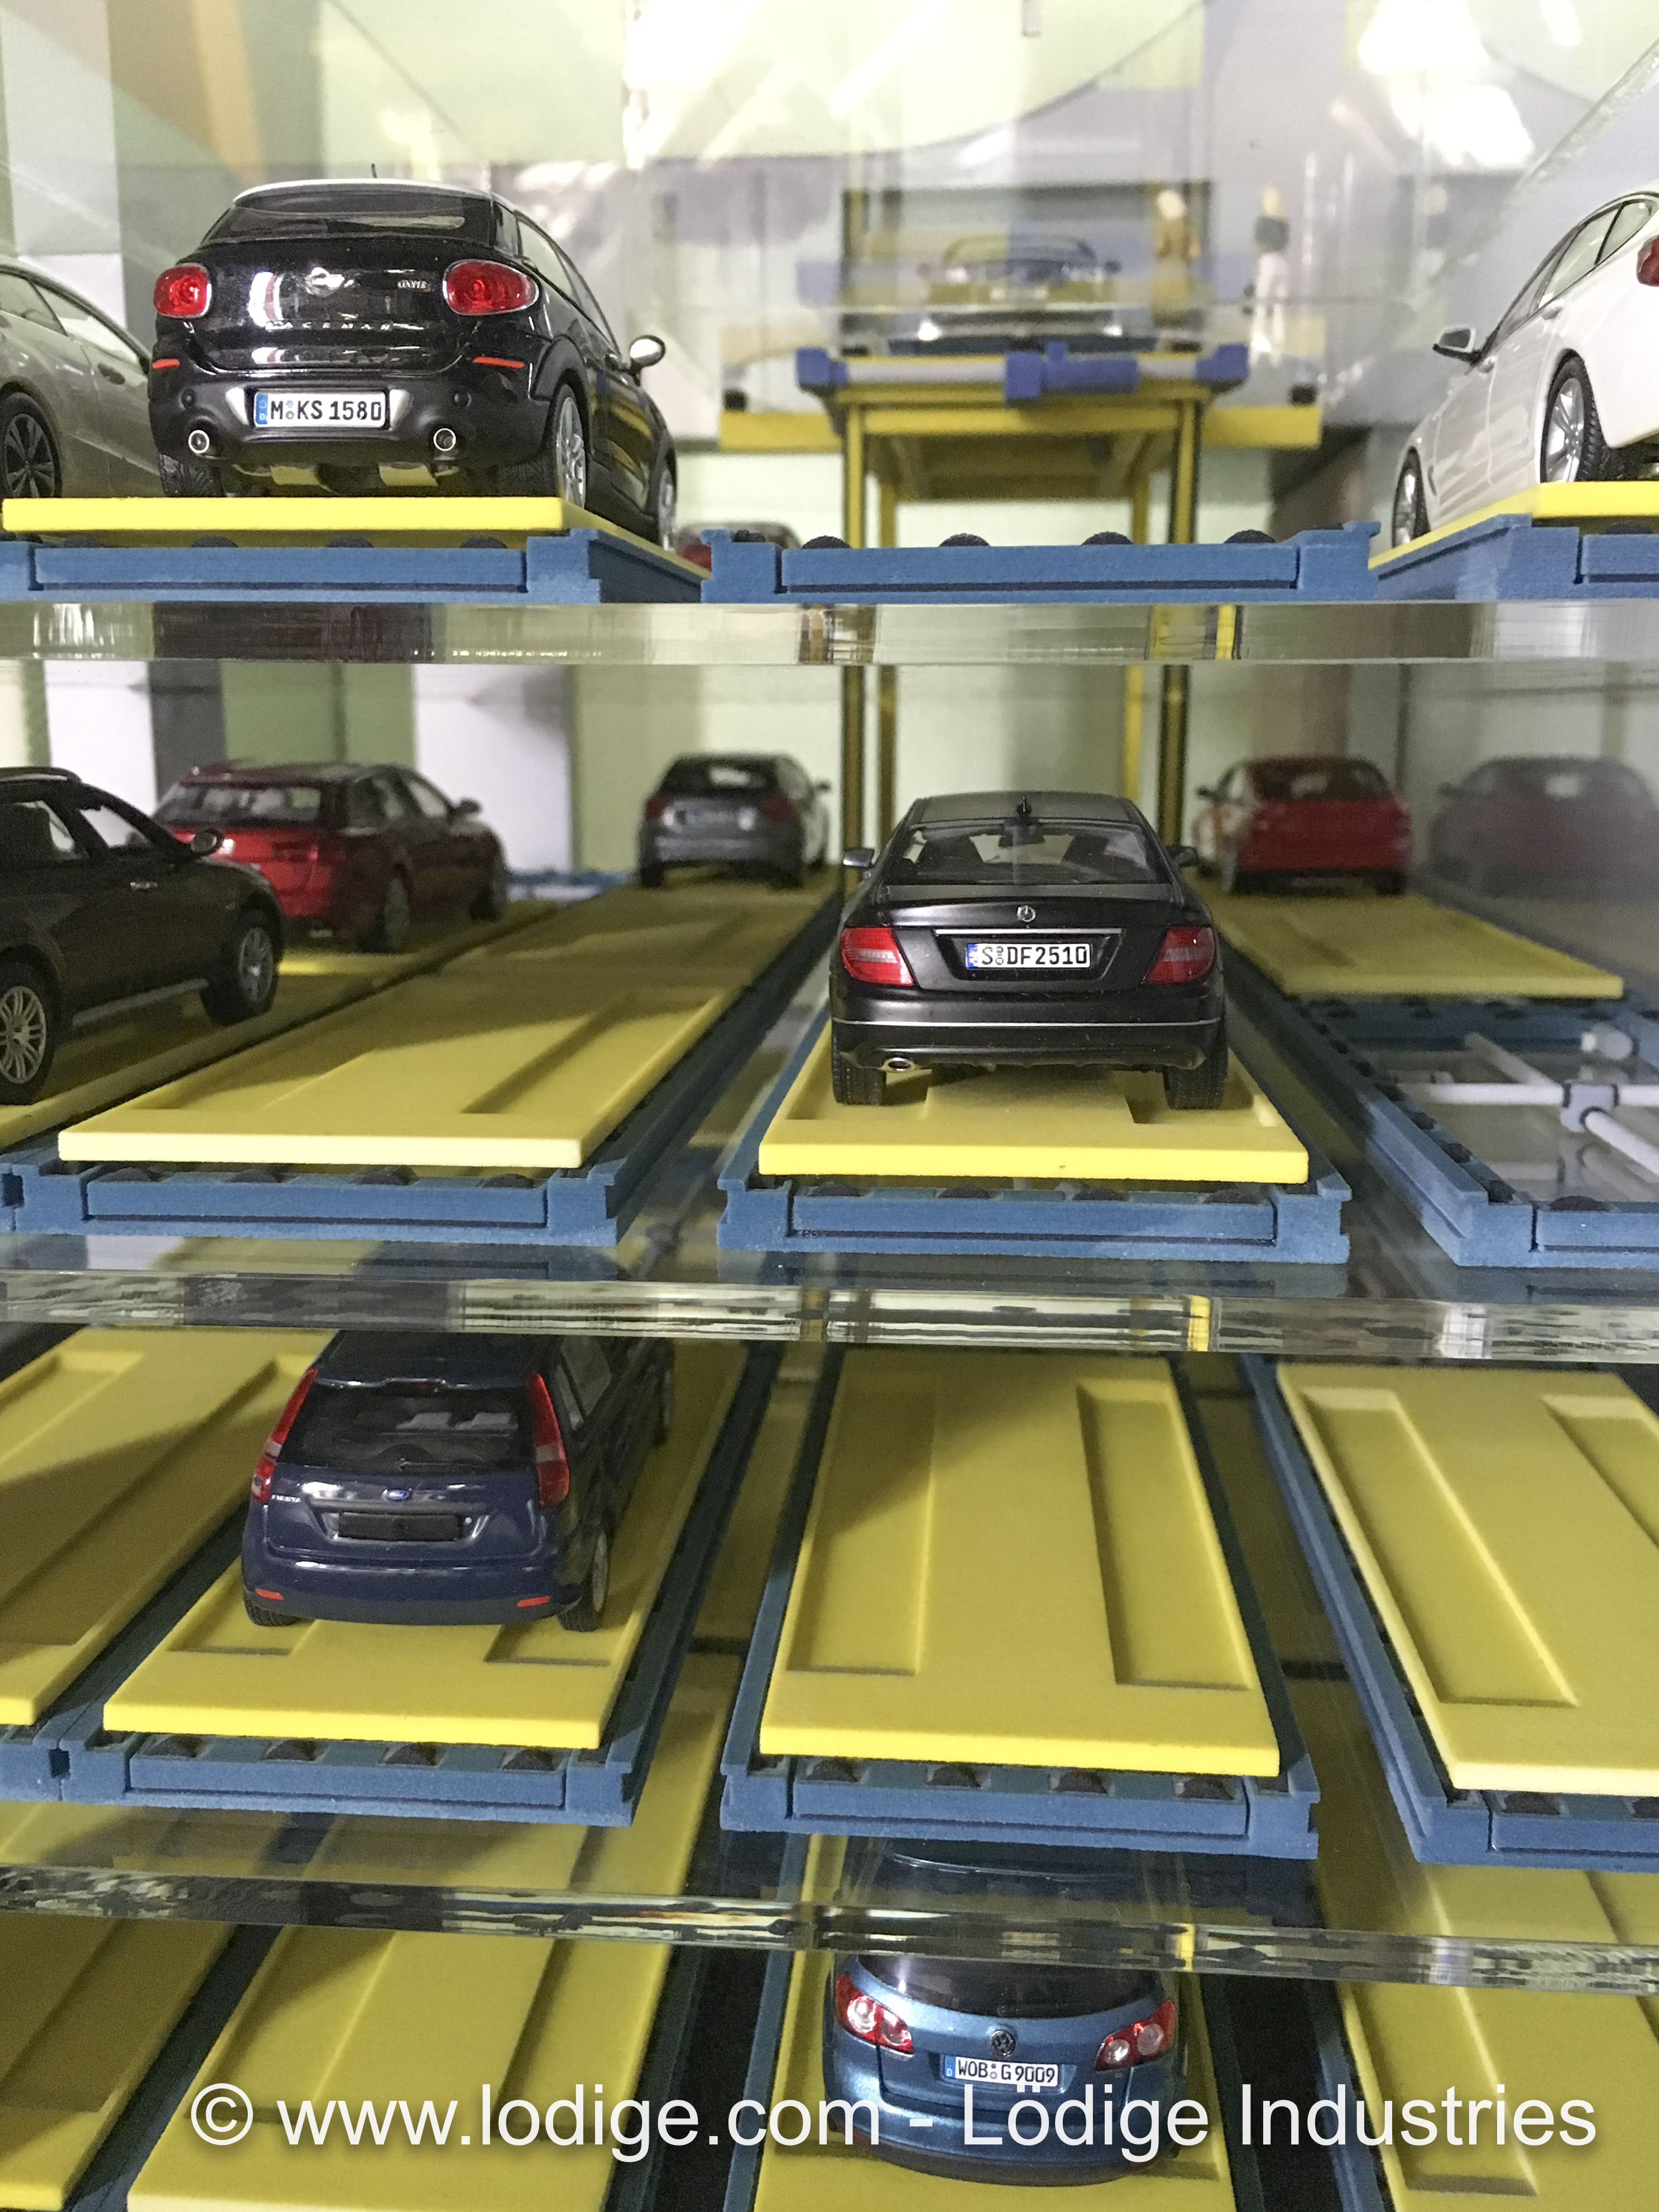 Pallet based automated car parking | Lodige Industries